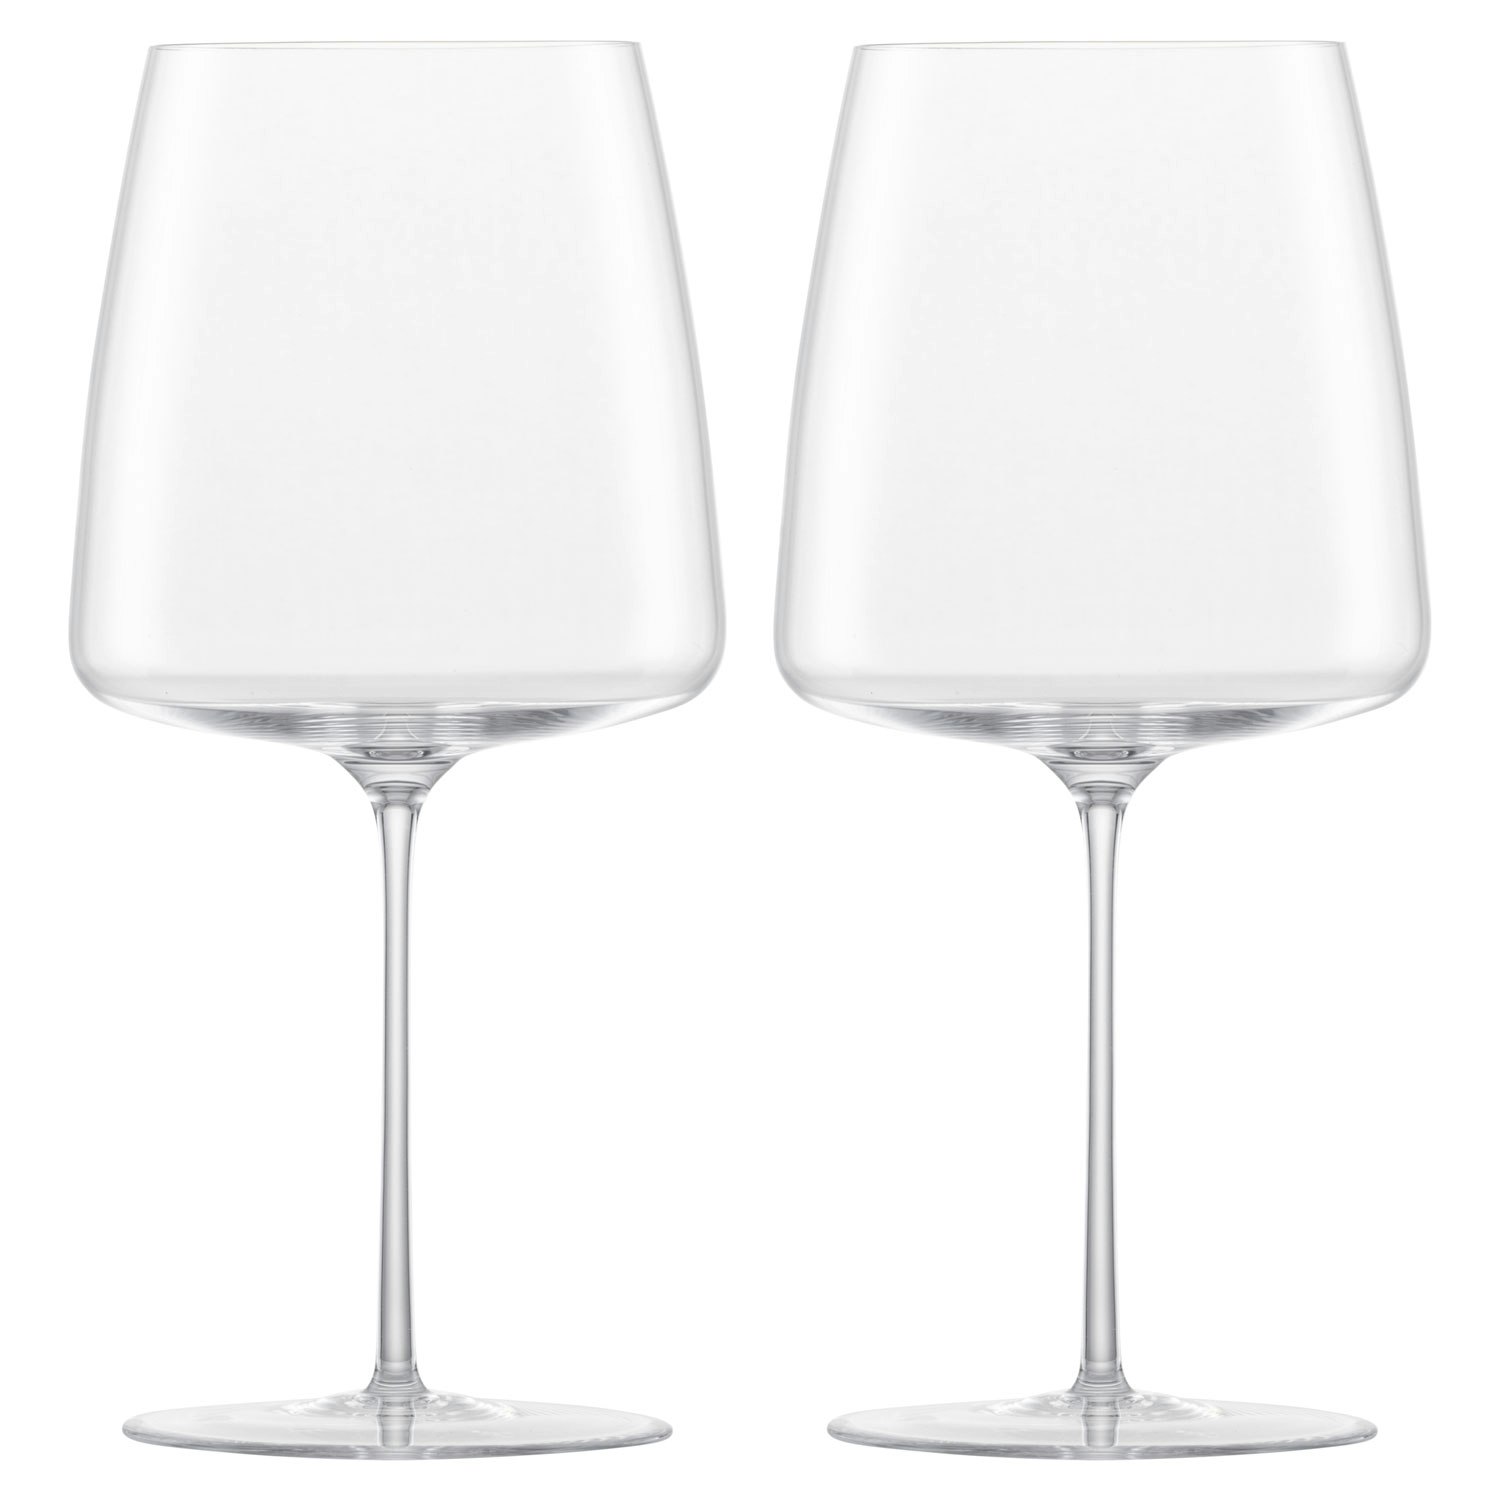 https://royaldesign.com/image/2/zwiesel-simplify-velvety-sumptuous-wine-glass-74-cl-2-pack-0